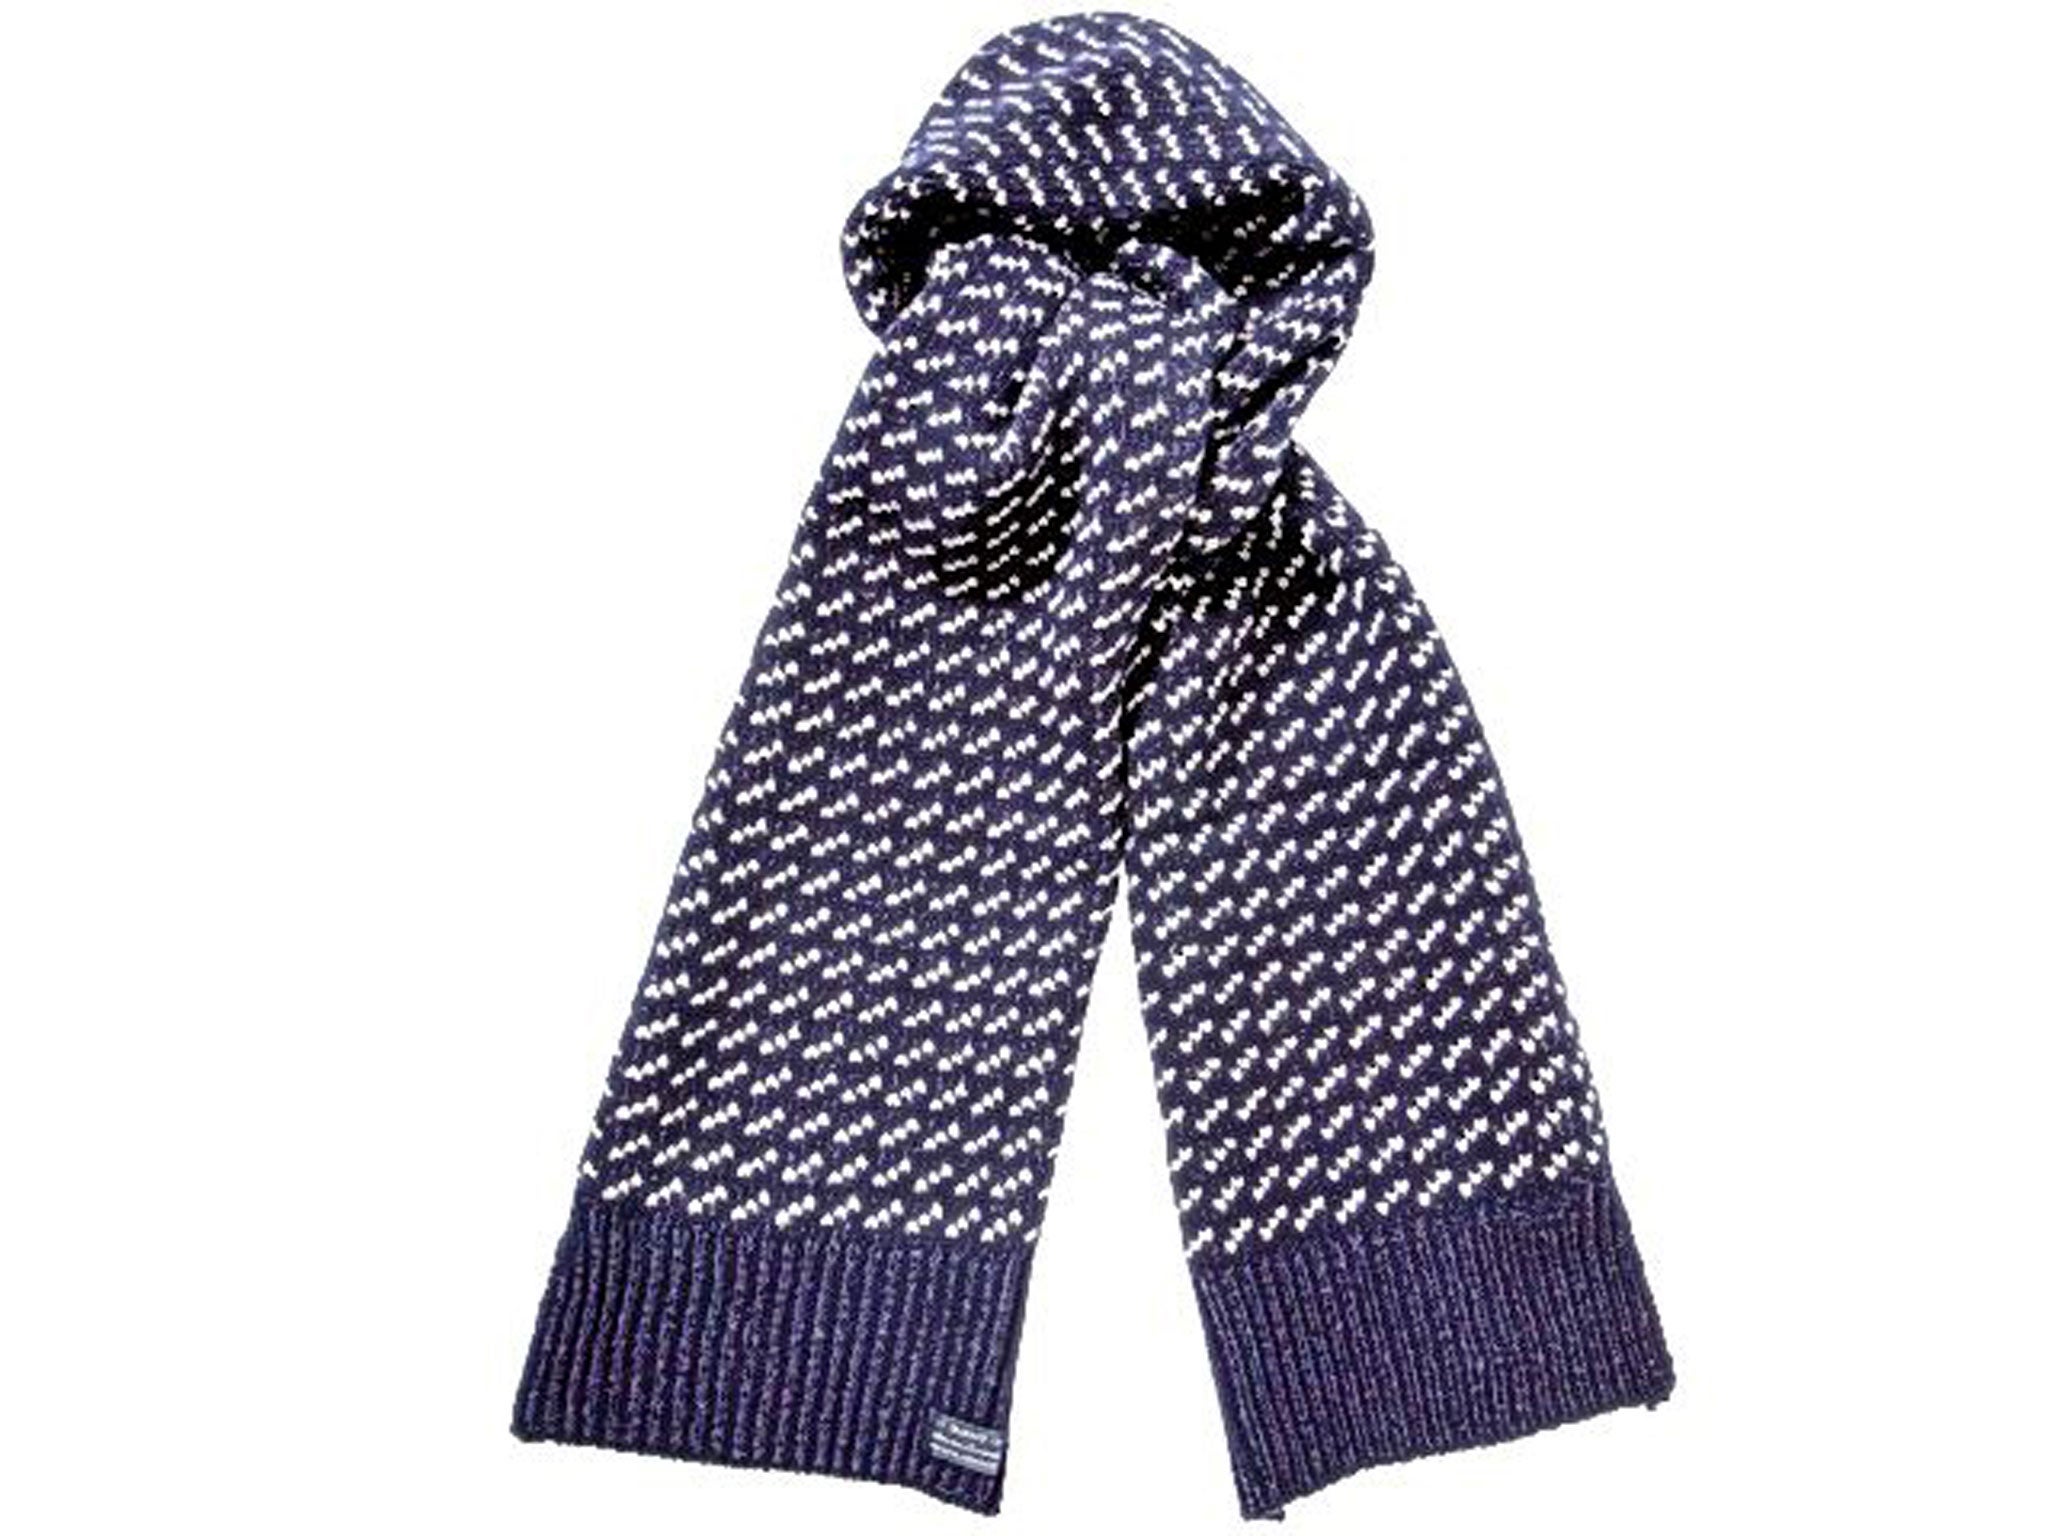 The 10 best scarves 